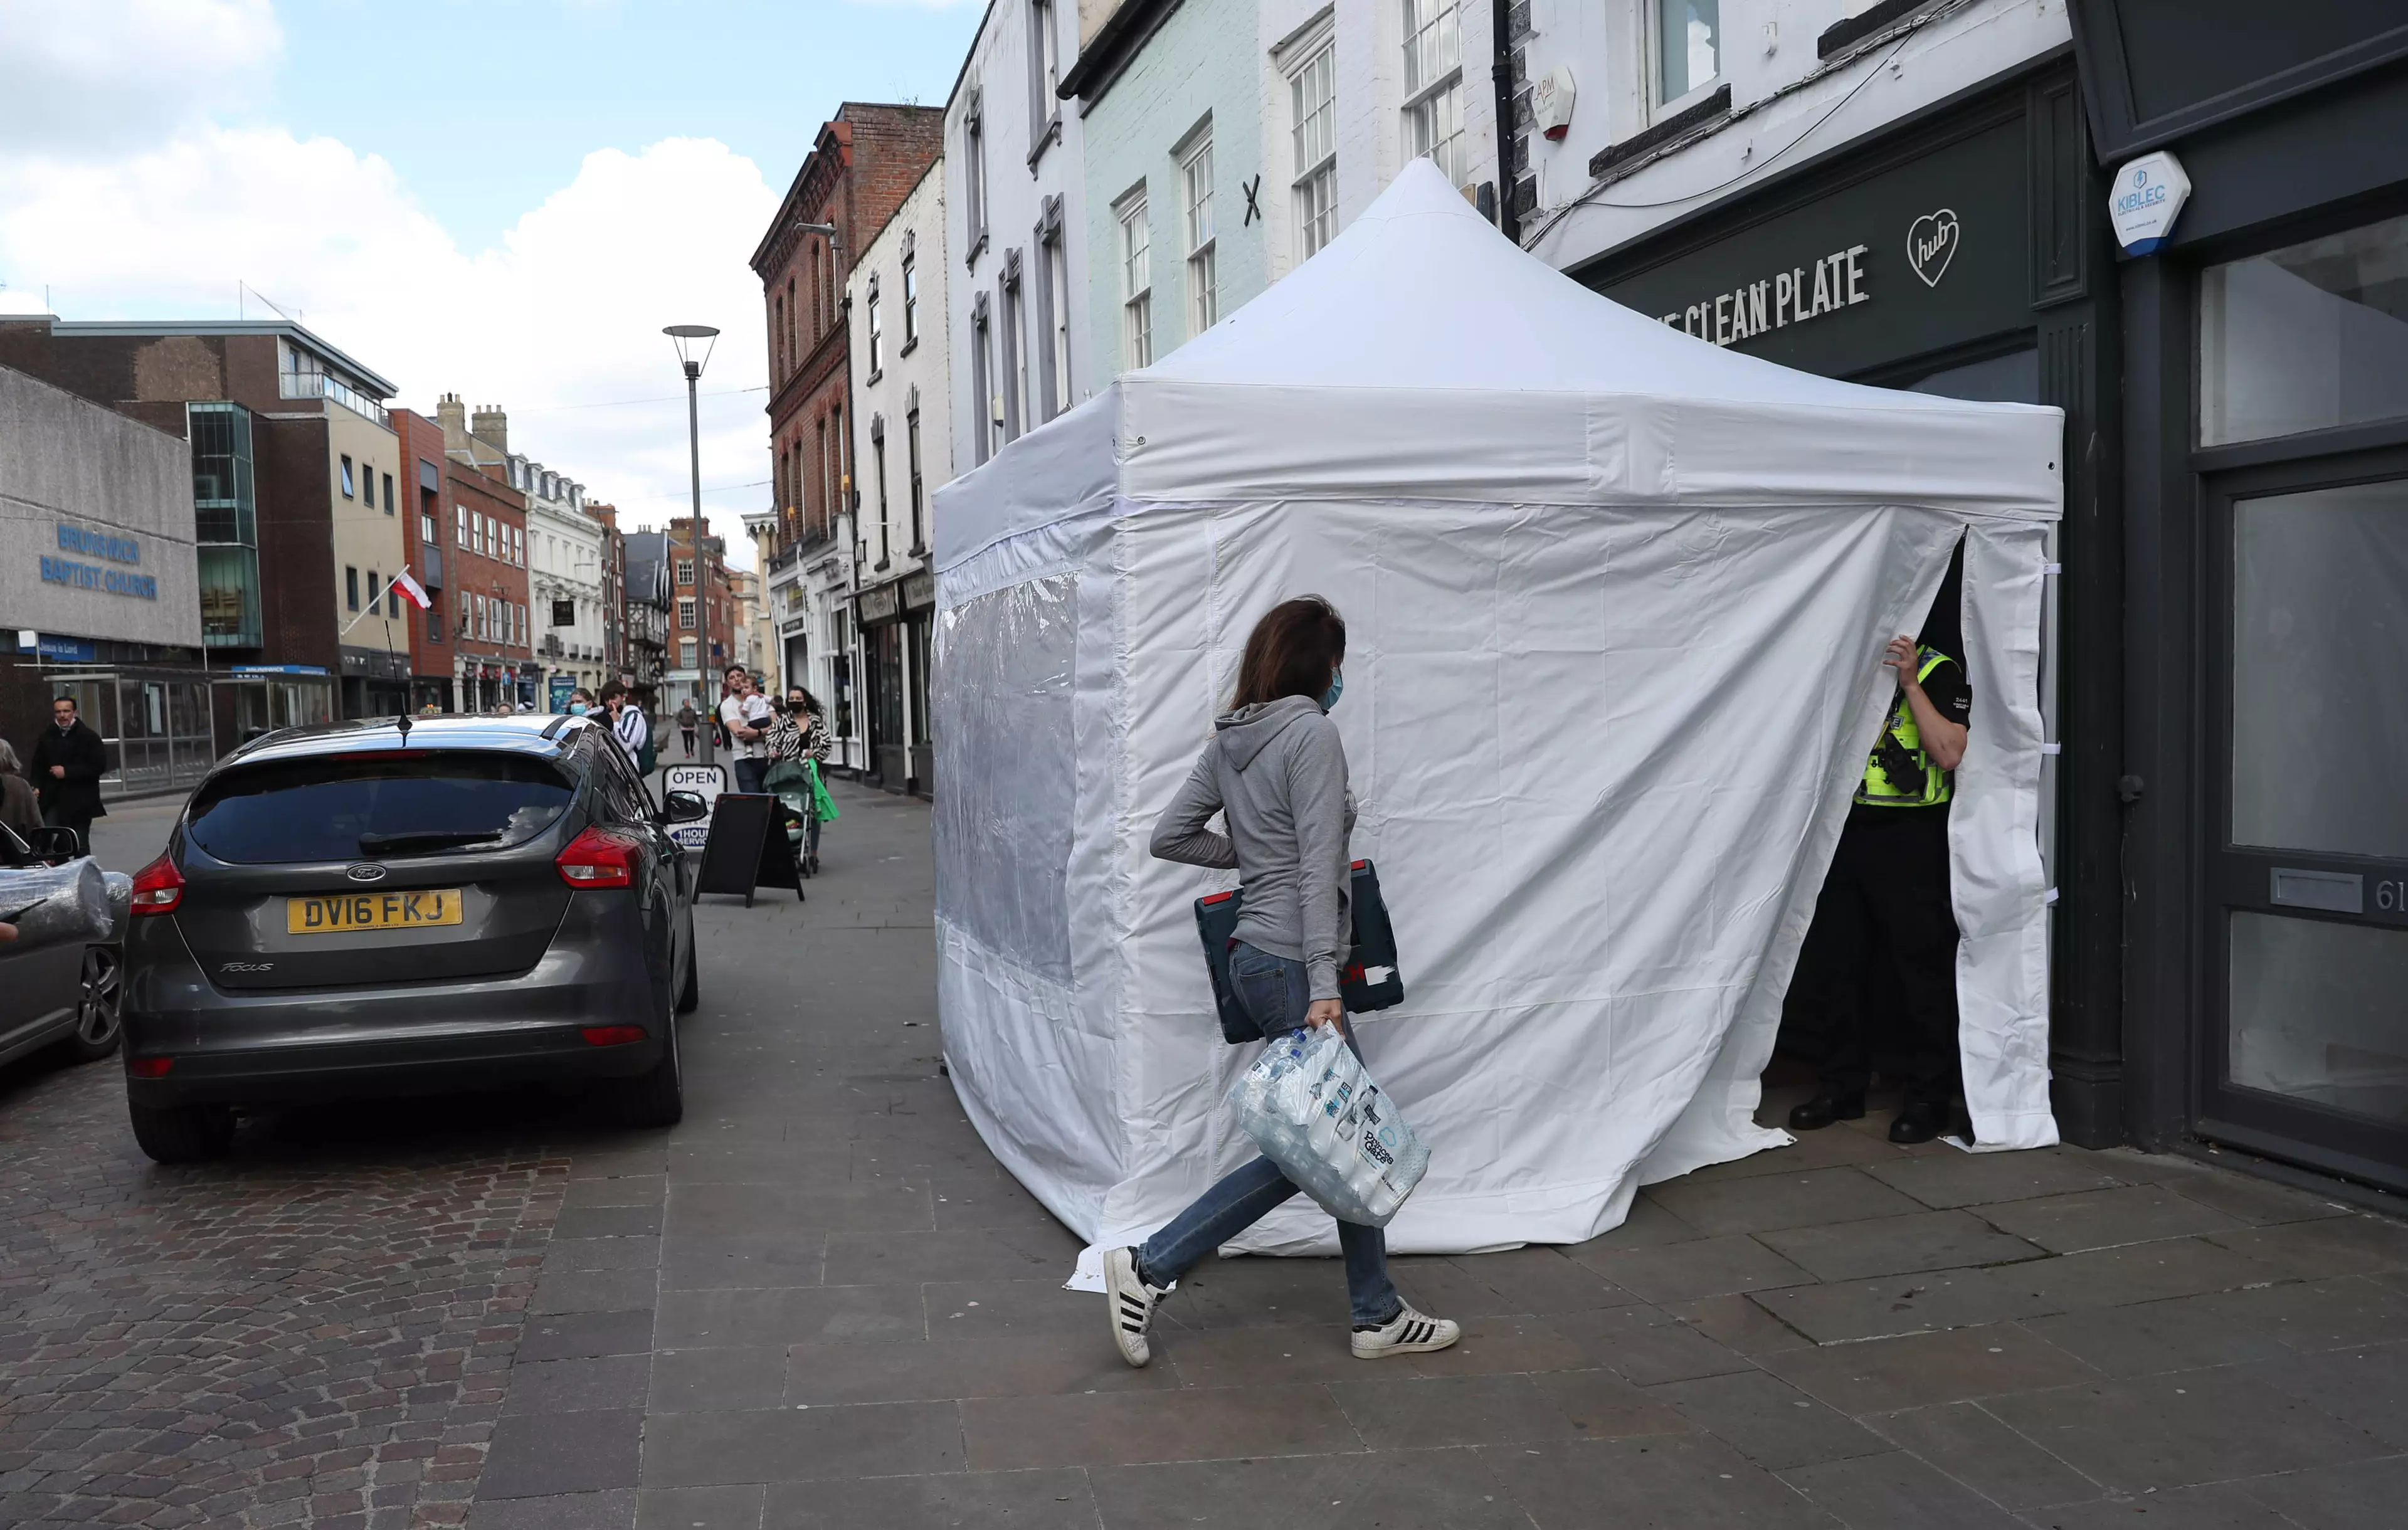 Police searching for Mary's remains at a café in Gloucester (